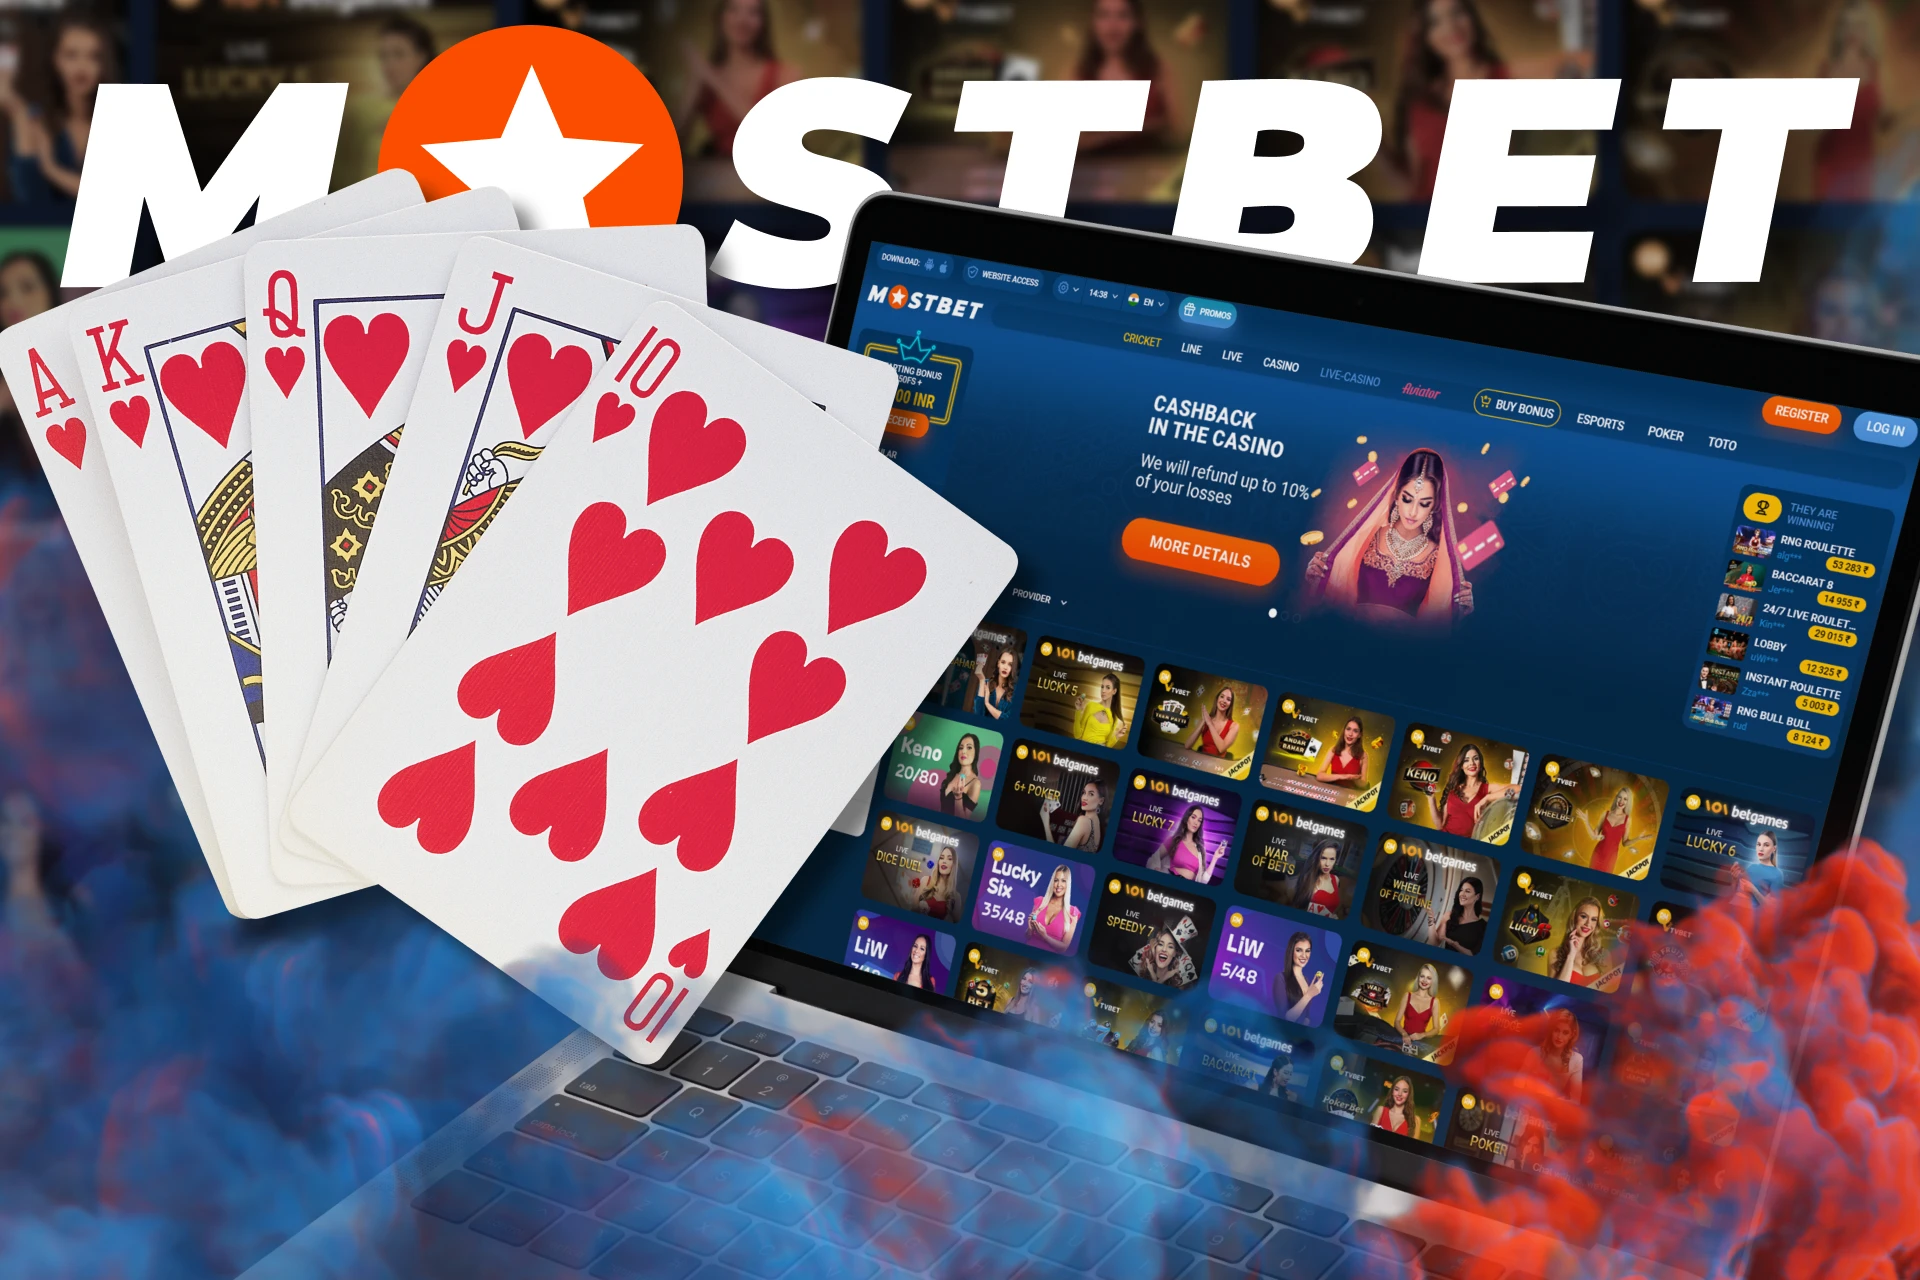 Try a card game Teen Patti at Mostbet.